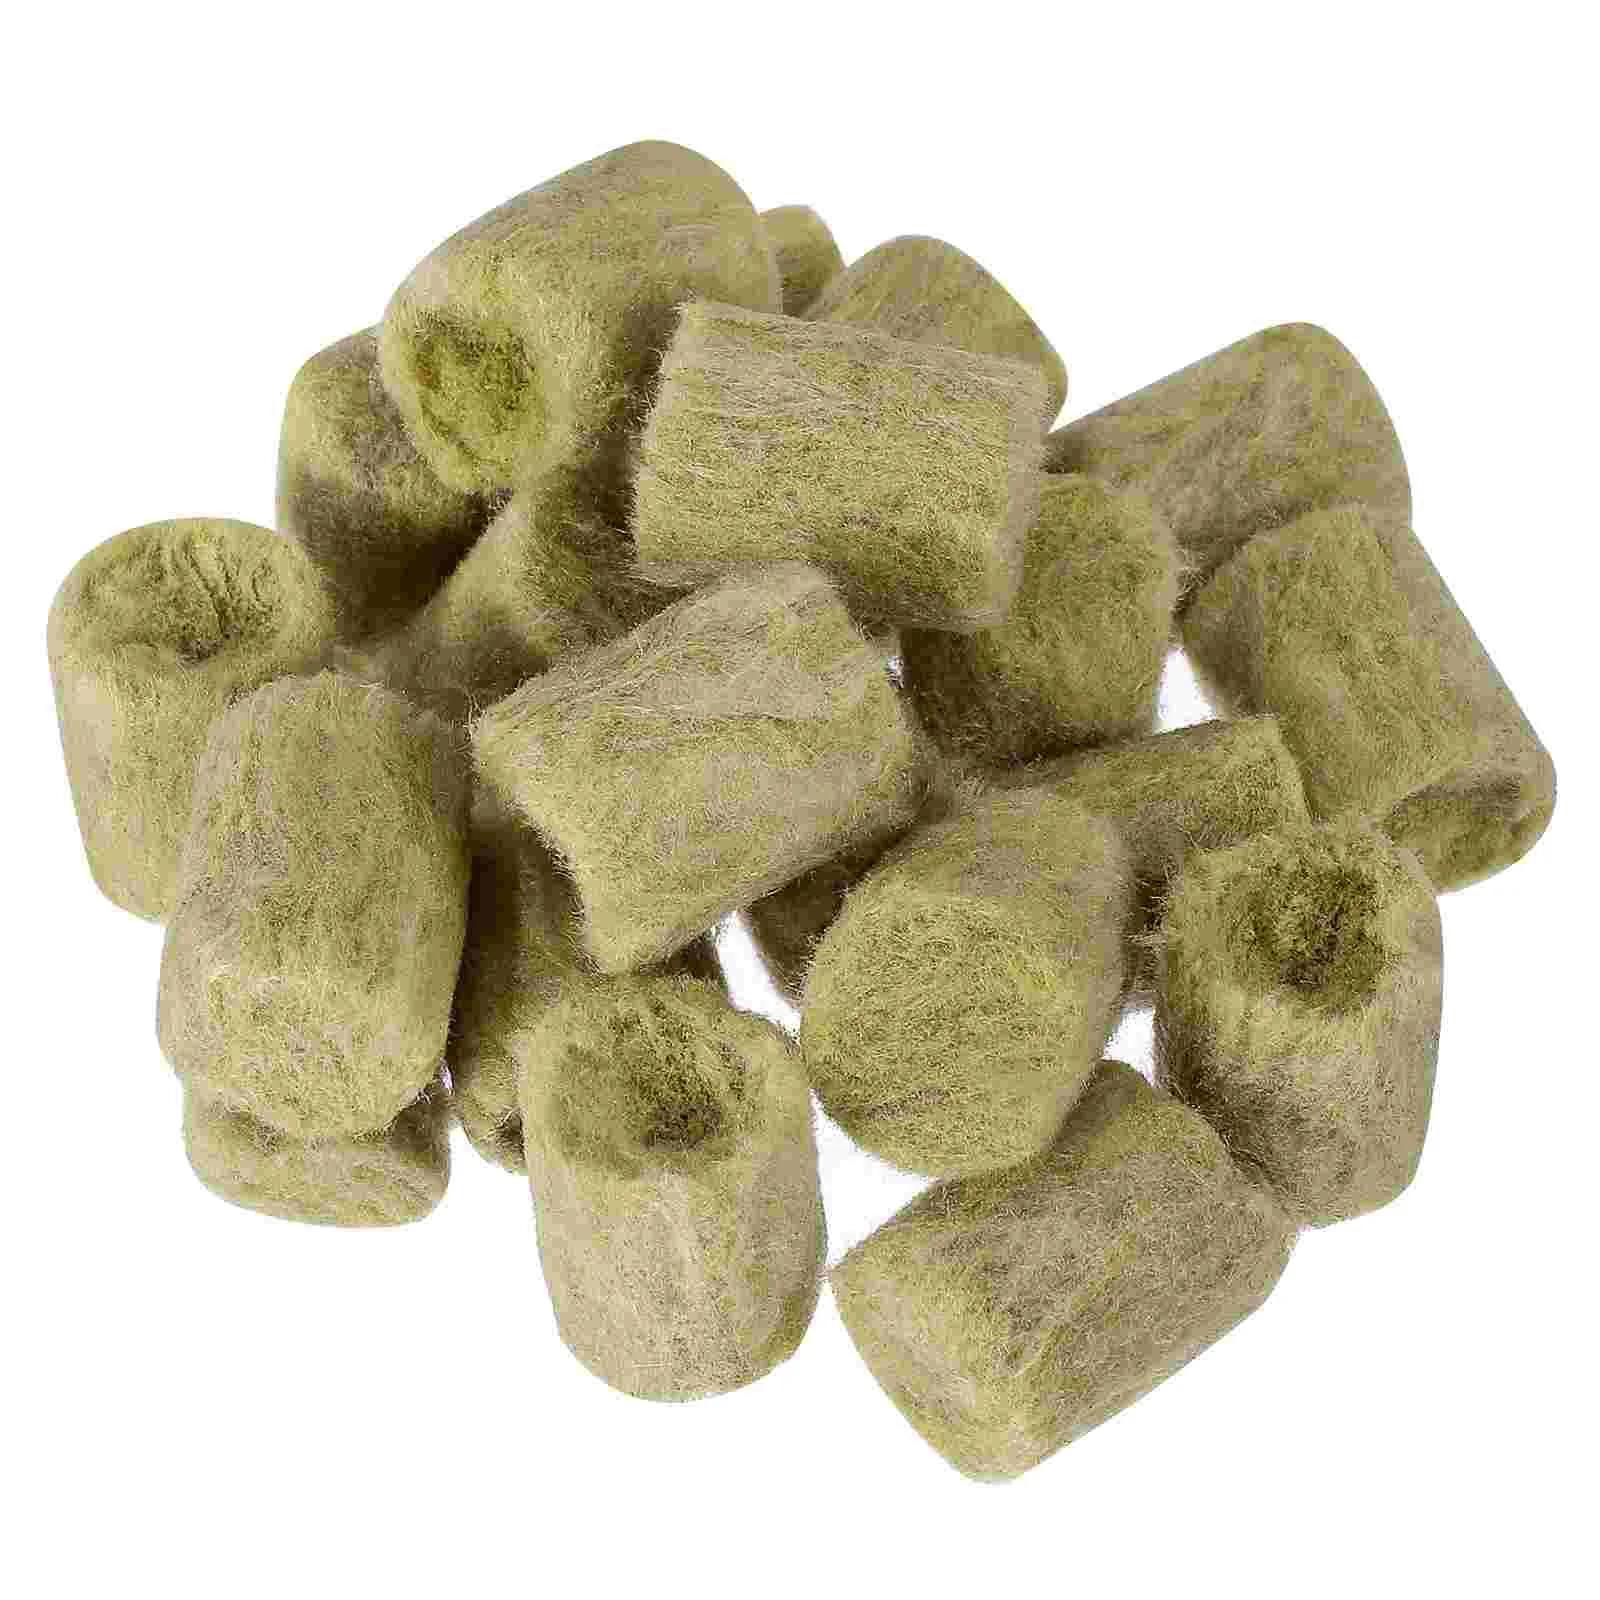 

Plugs Mineral Wool Hydroponics Starter Supplies Gardening Hydroponic Plug Macro Round Cubes Soilless Grow Tools Cultivation Pods